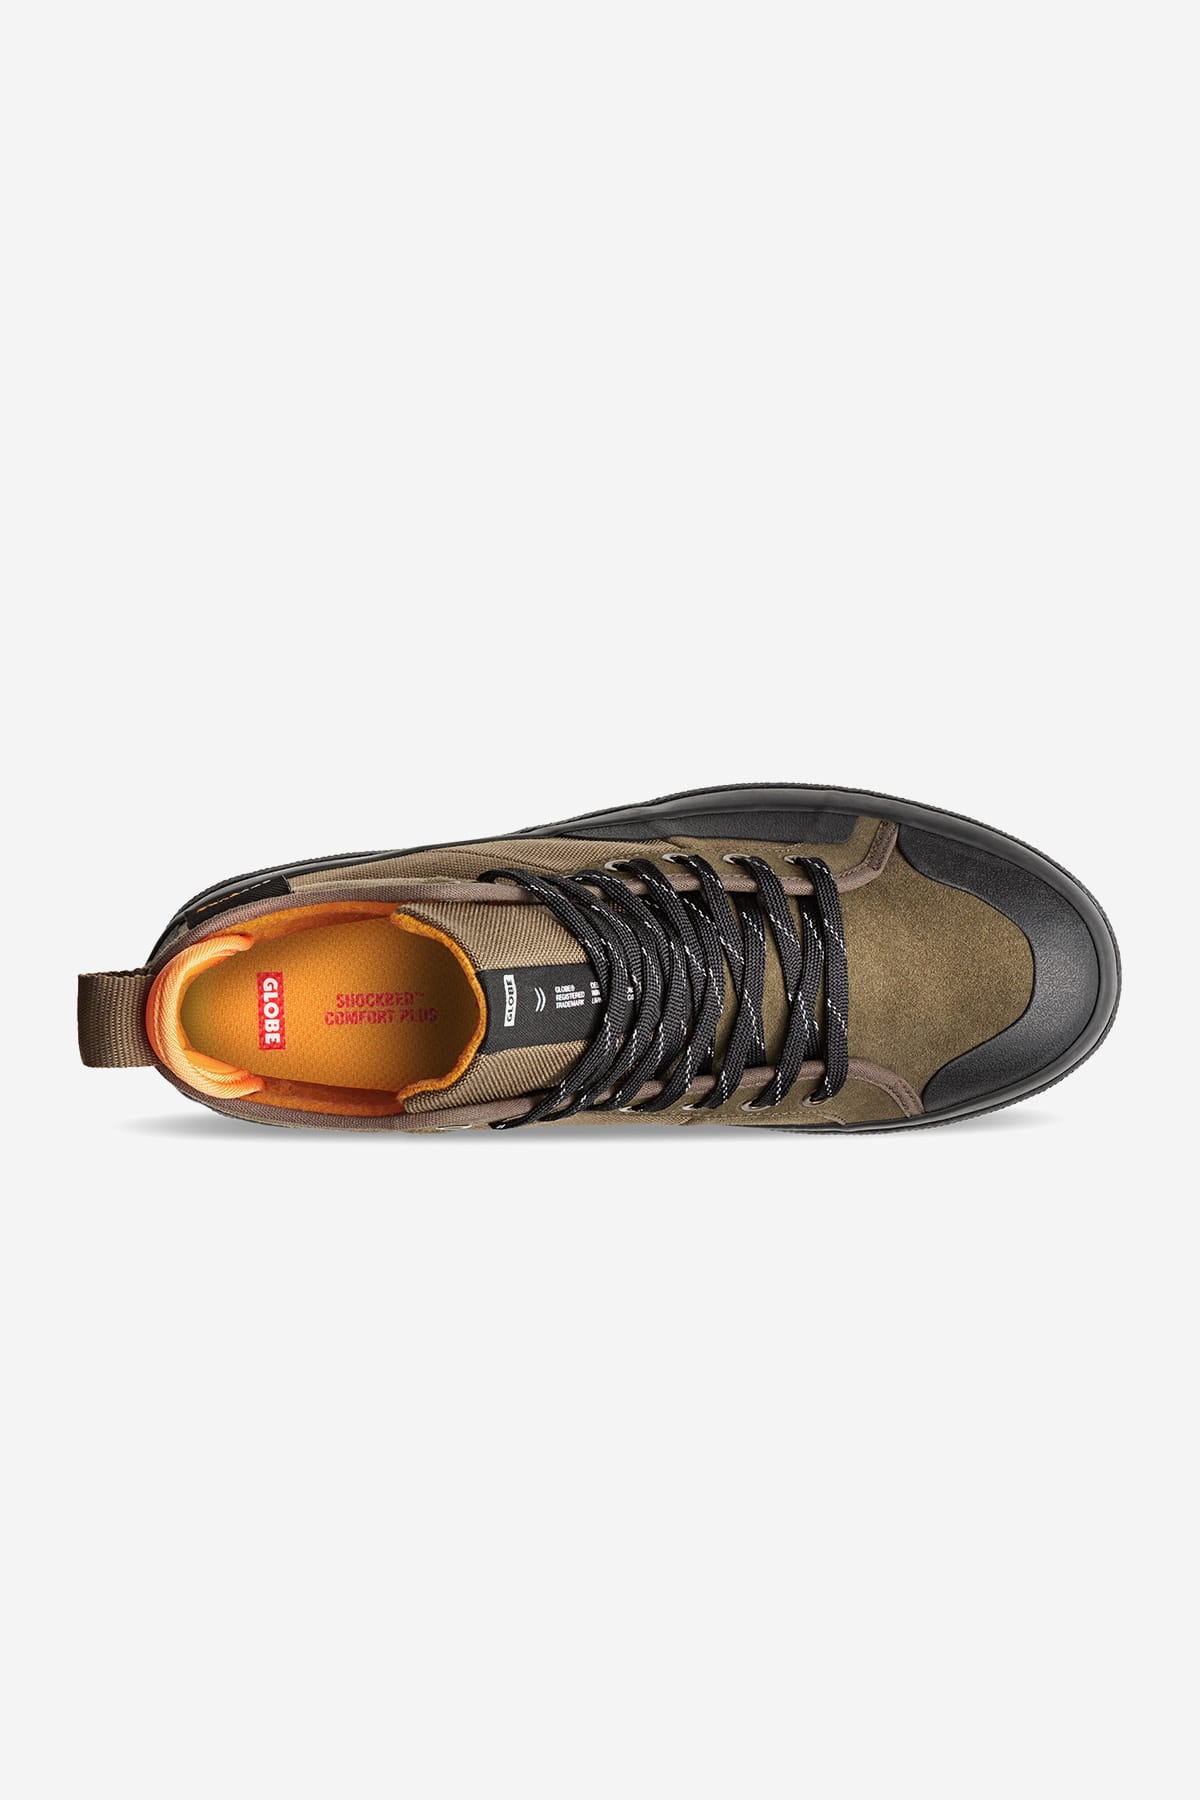 los angered ii hiver olive summit skateboard chaussures